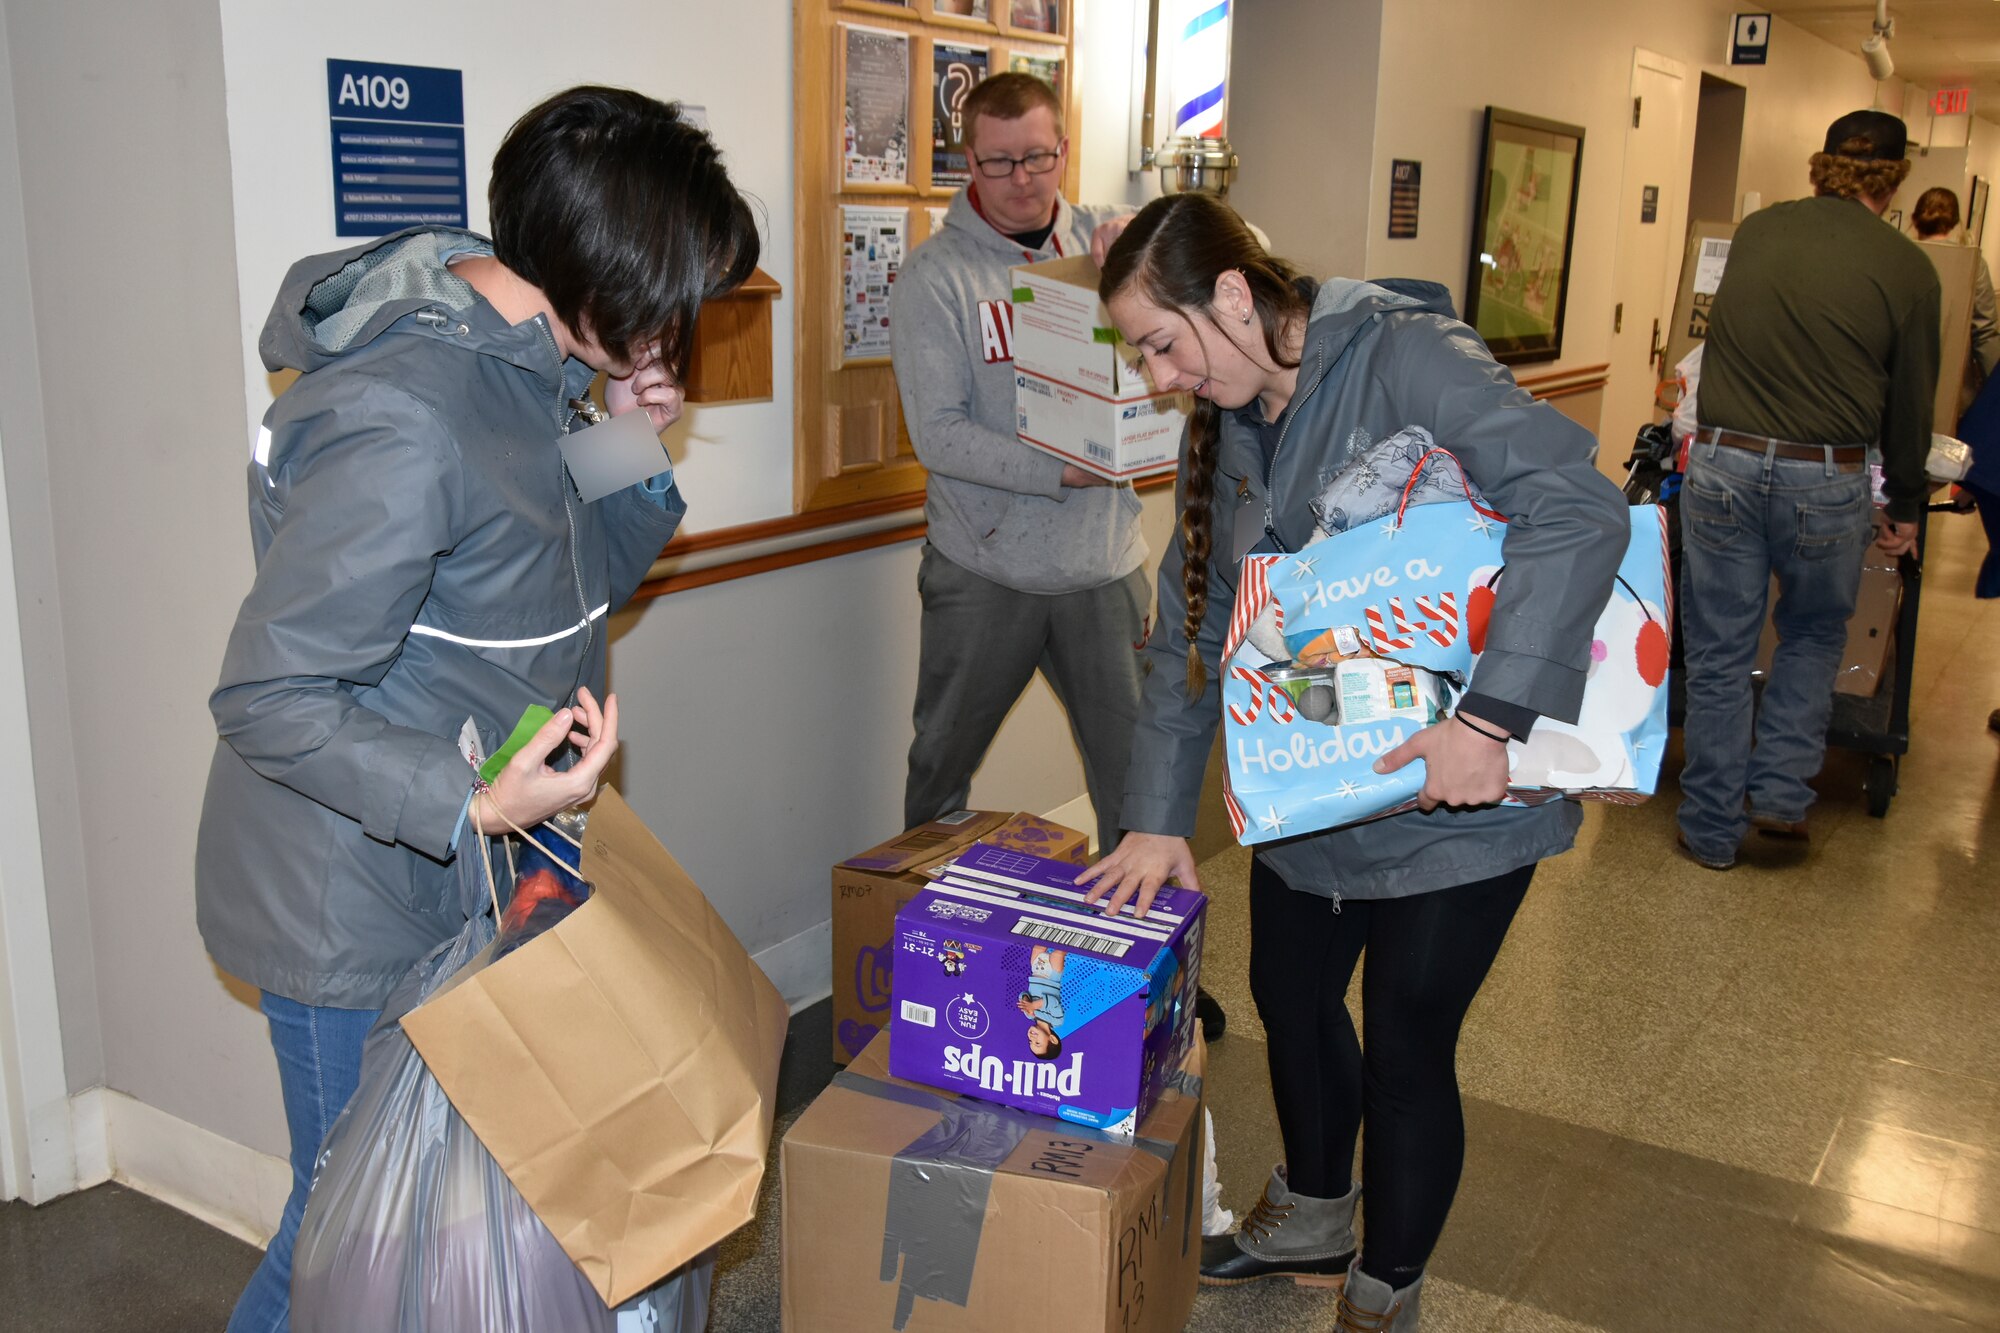 Heather Ricardson, left, and Hayley Pomarico, right, from the Center for Family Development in Shelbyville collect gifts purchased by Arnold Air Force Base personnel during the 2022 Arnold Engineering Development Complex Gift Sponsor toy drive, previously known as the AEDC Angel Tree, Dec. 14, 2022, at Arnold AFB, Tennessee. Members of the Arnold workforce sponsored more than 150 area children this year to provide them with gifts for Christmas. (U.S. Air Force photo by Bradley Hicks) (This image was altered by obscuring badges for security purposes.)